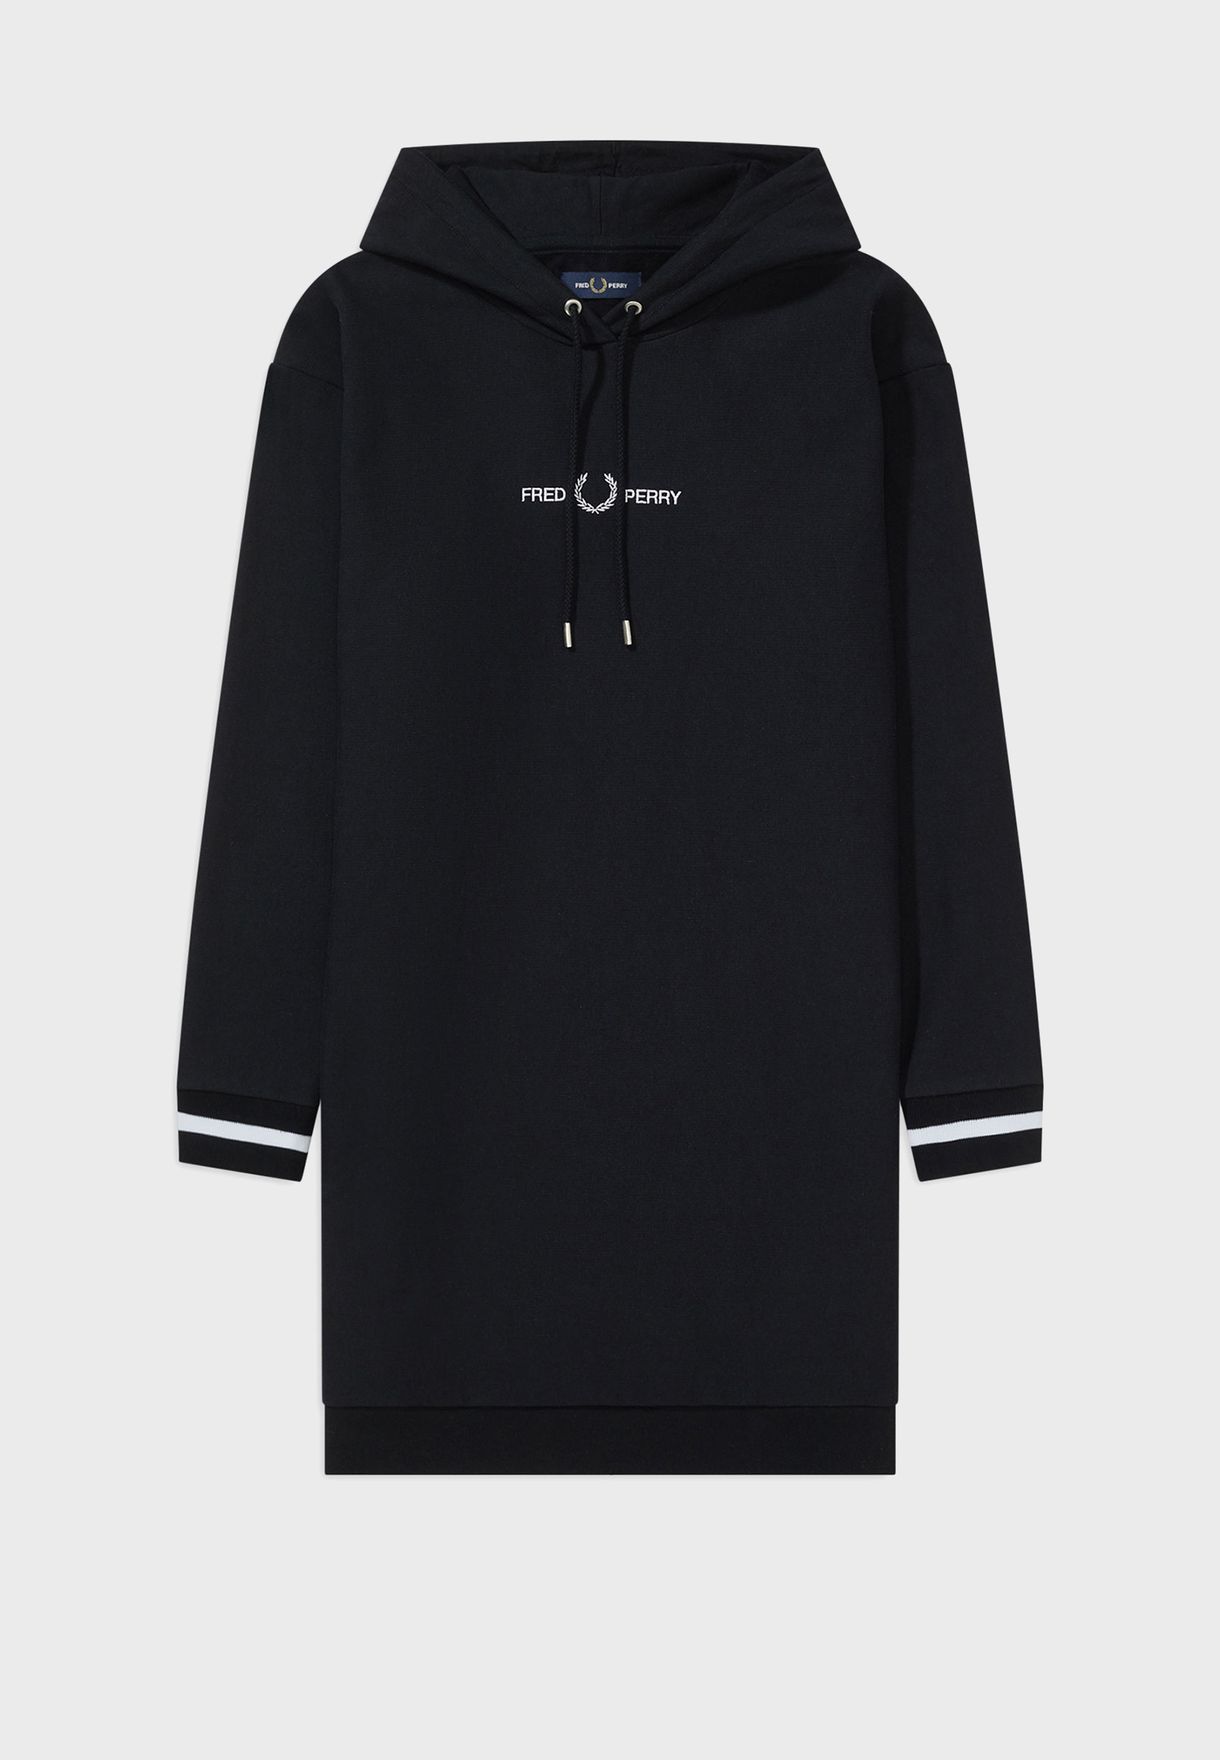 fred perry embroidered sweat